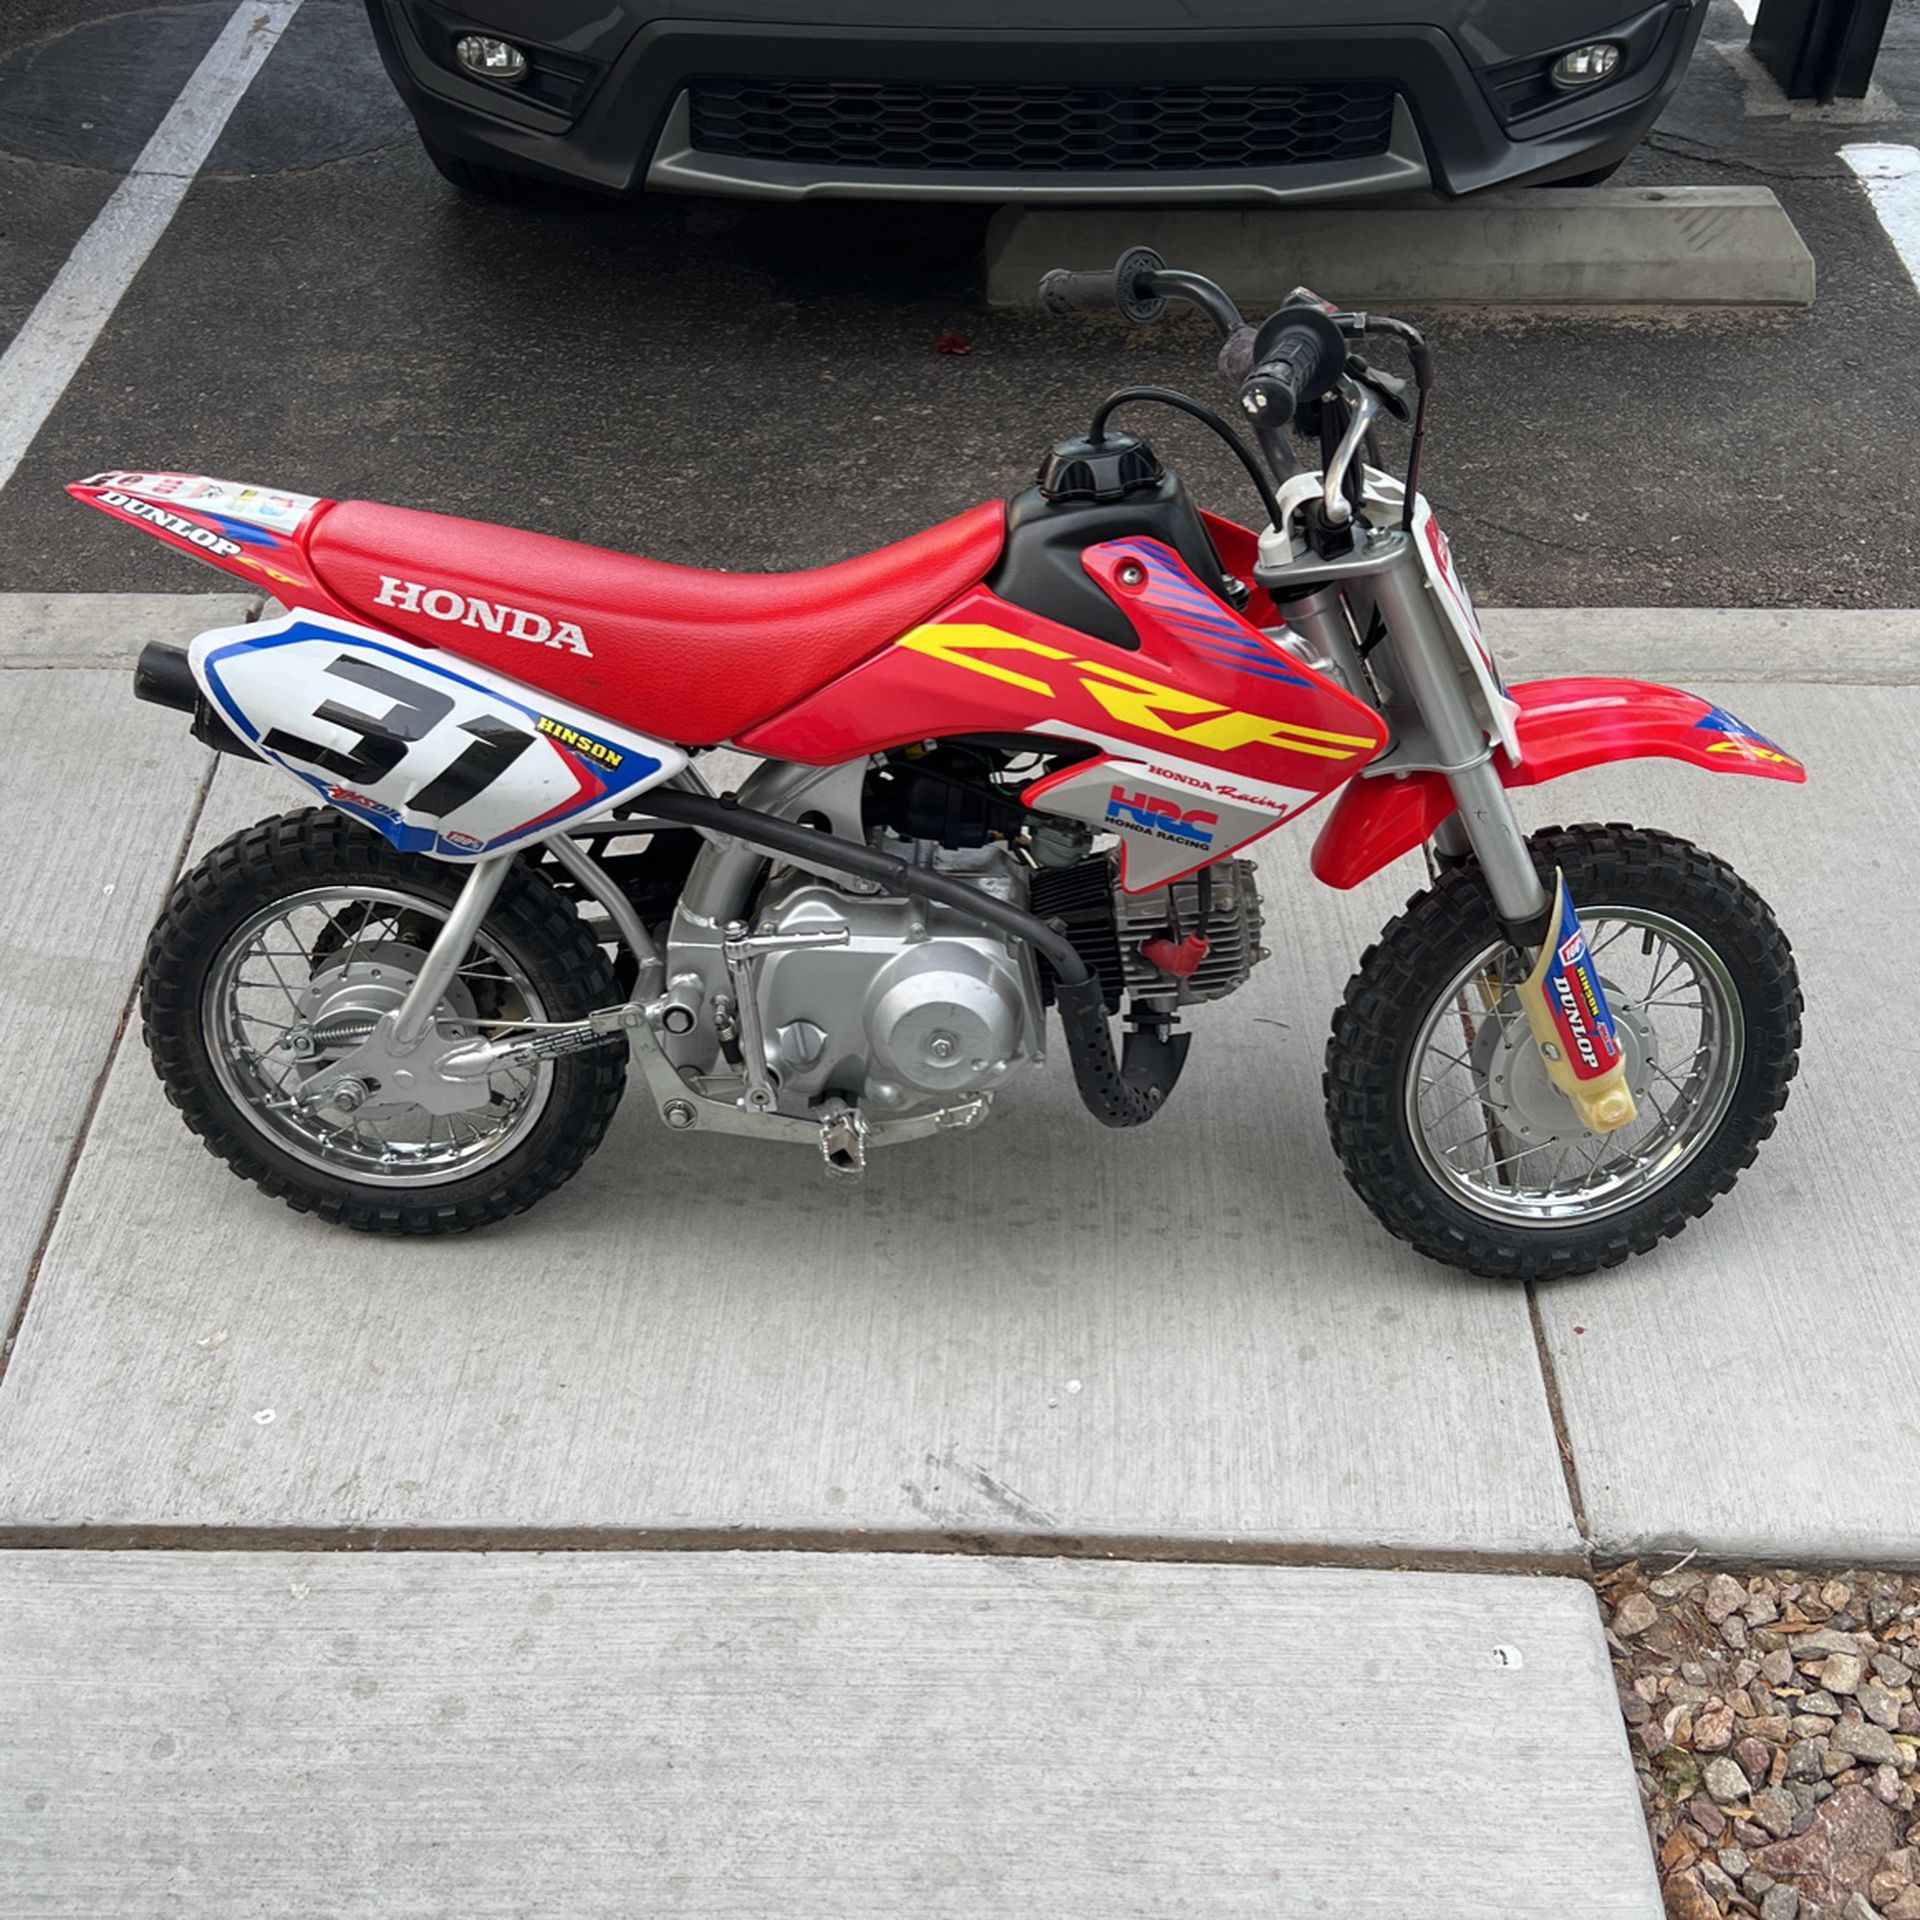 2017 Crf50 Great Condition 5-6 Hrs On Bike